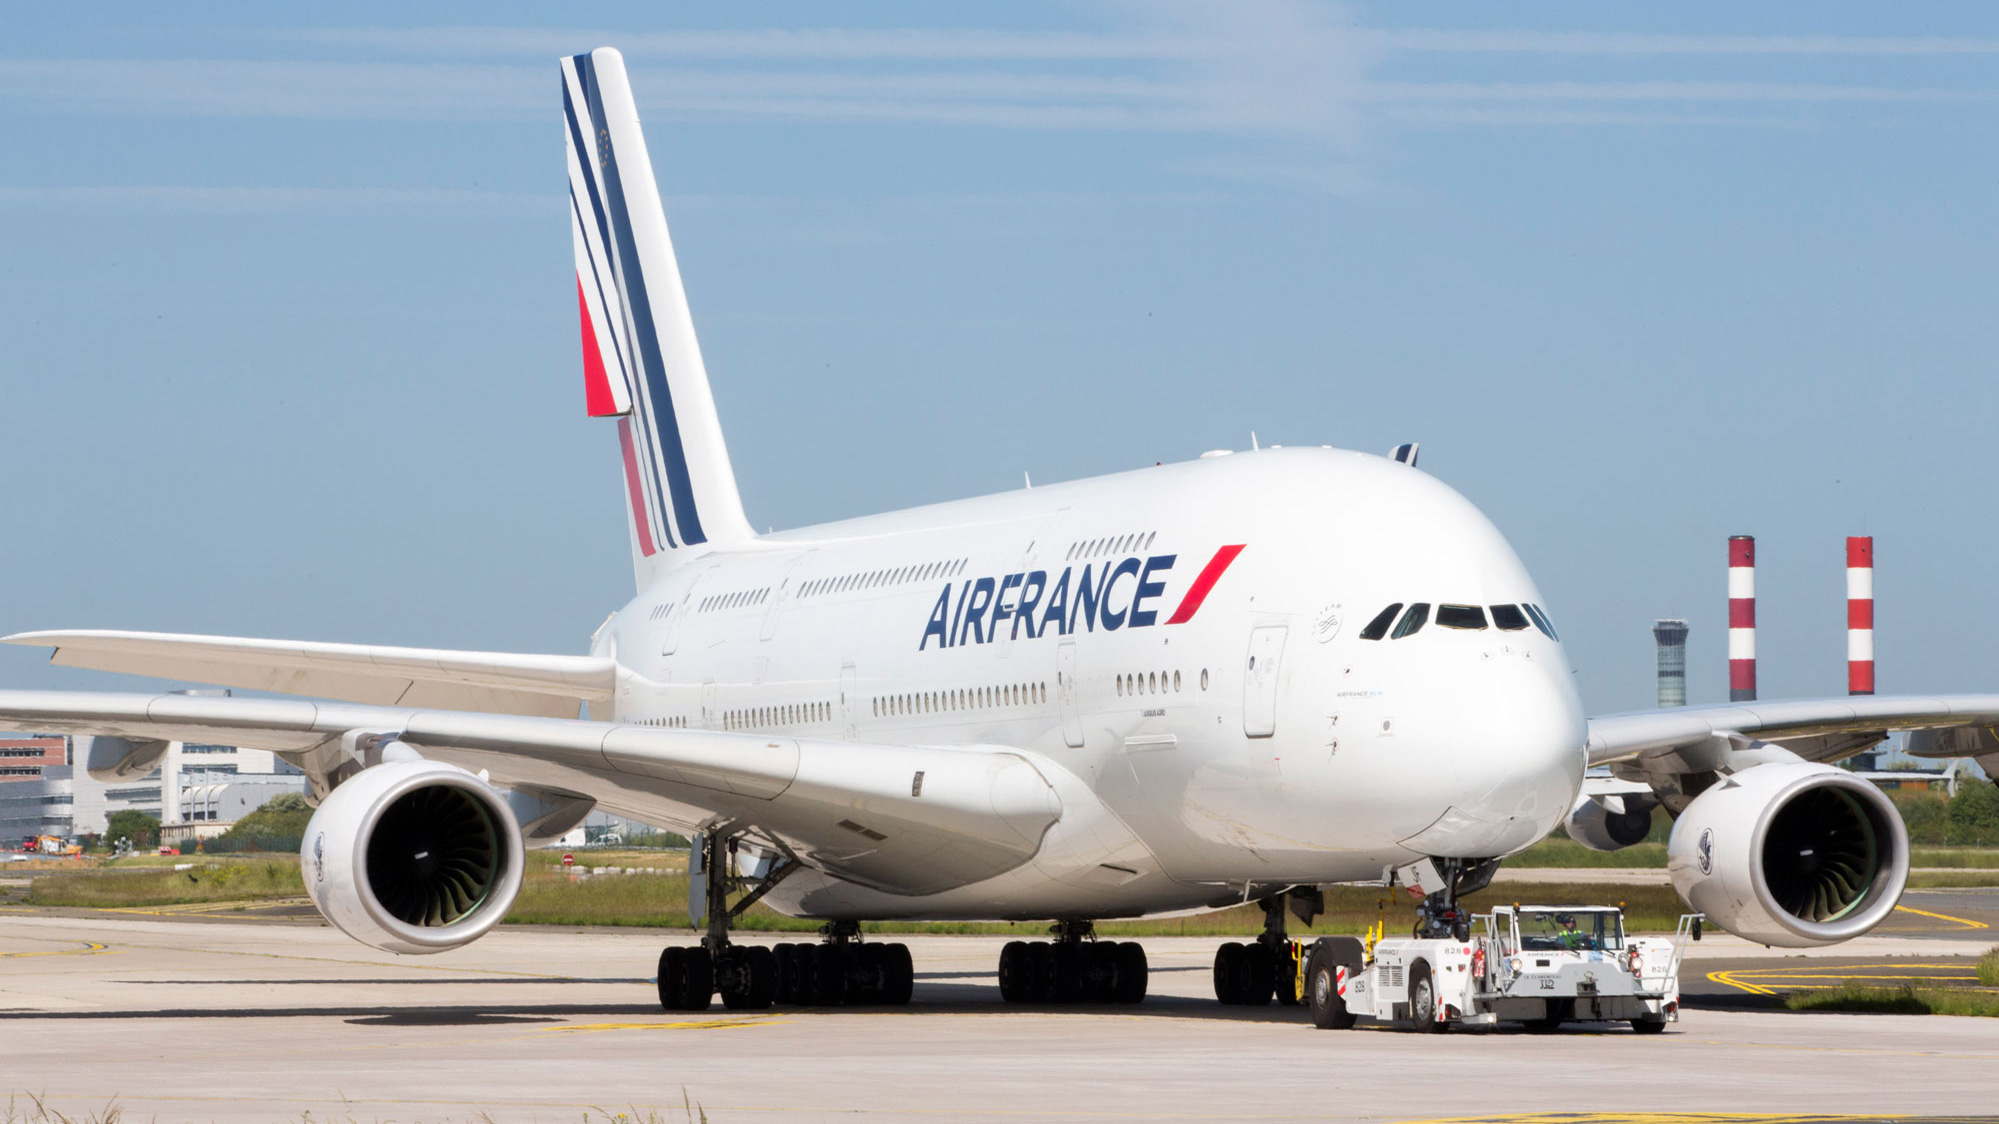 Air France is certified as a 4Star Airline Skytrax